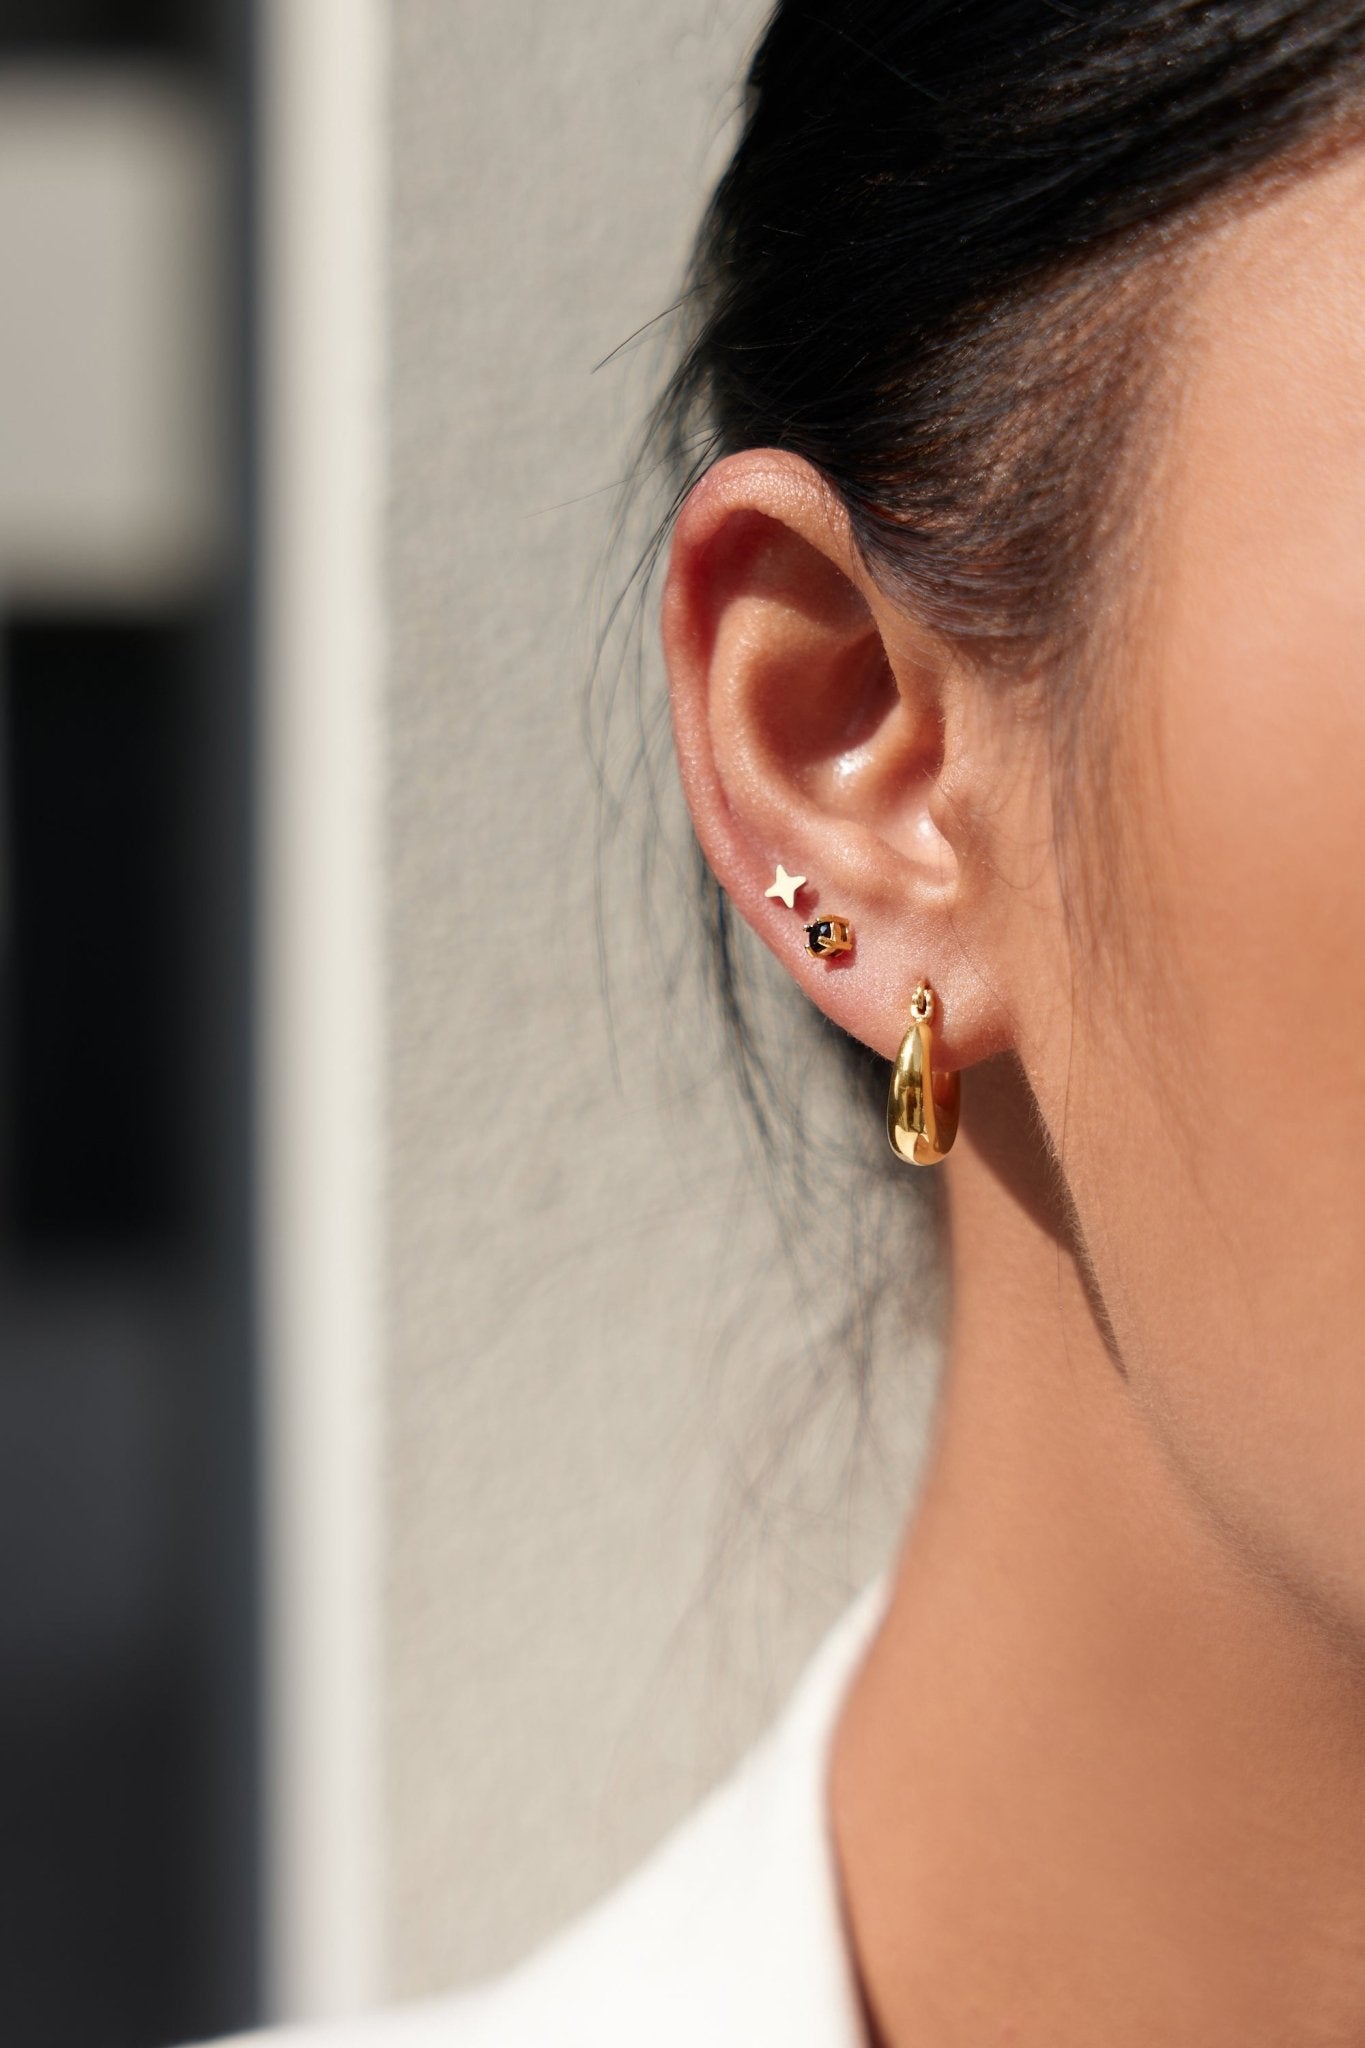 Flare Star Stud in Gold - Flaire & Co.